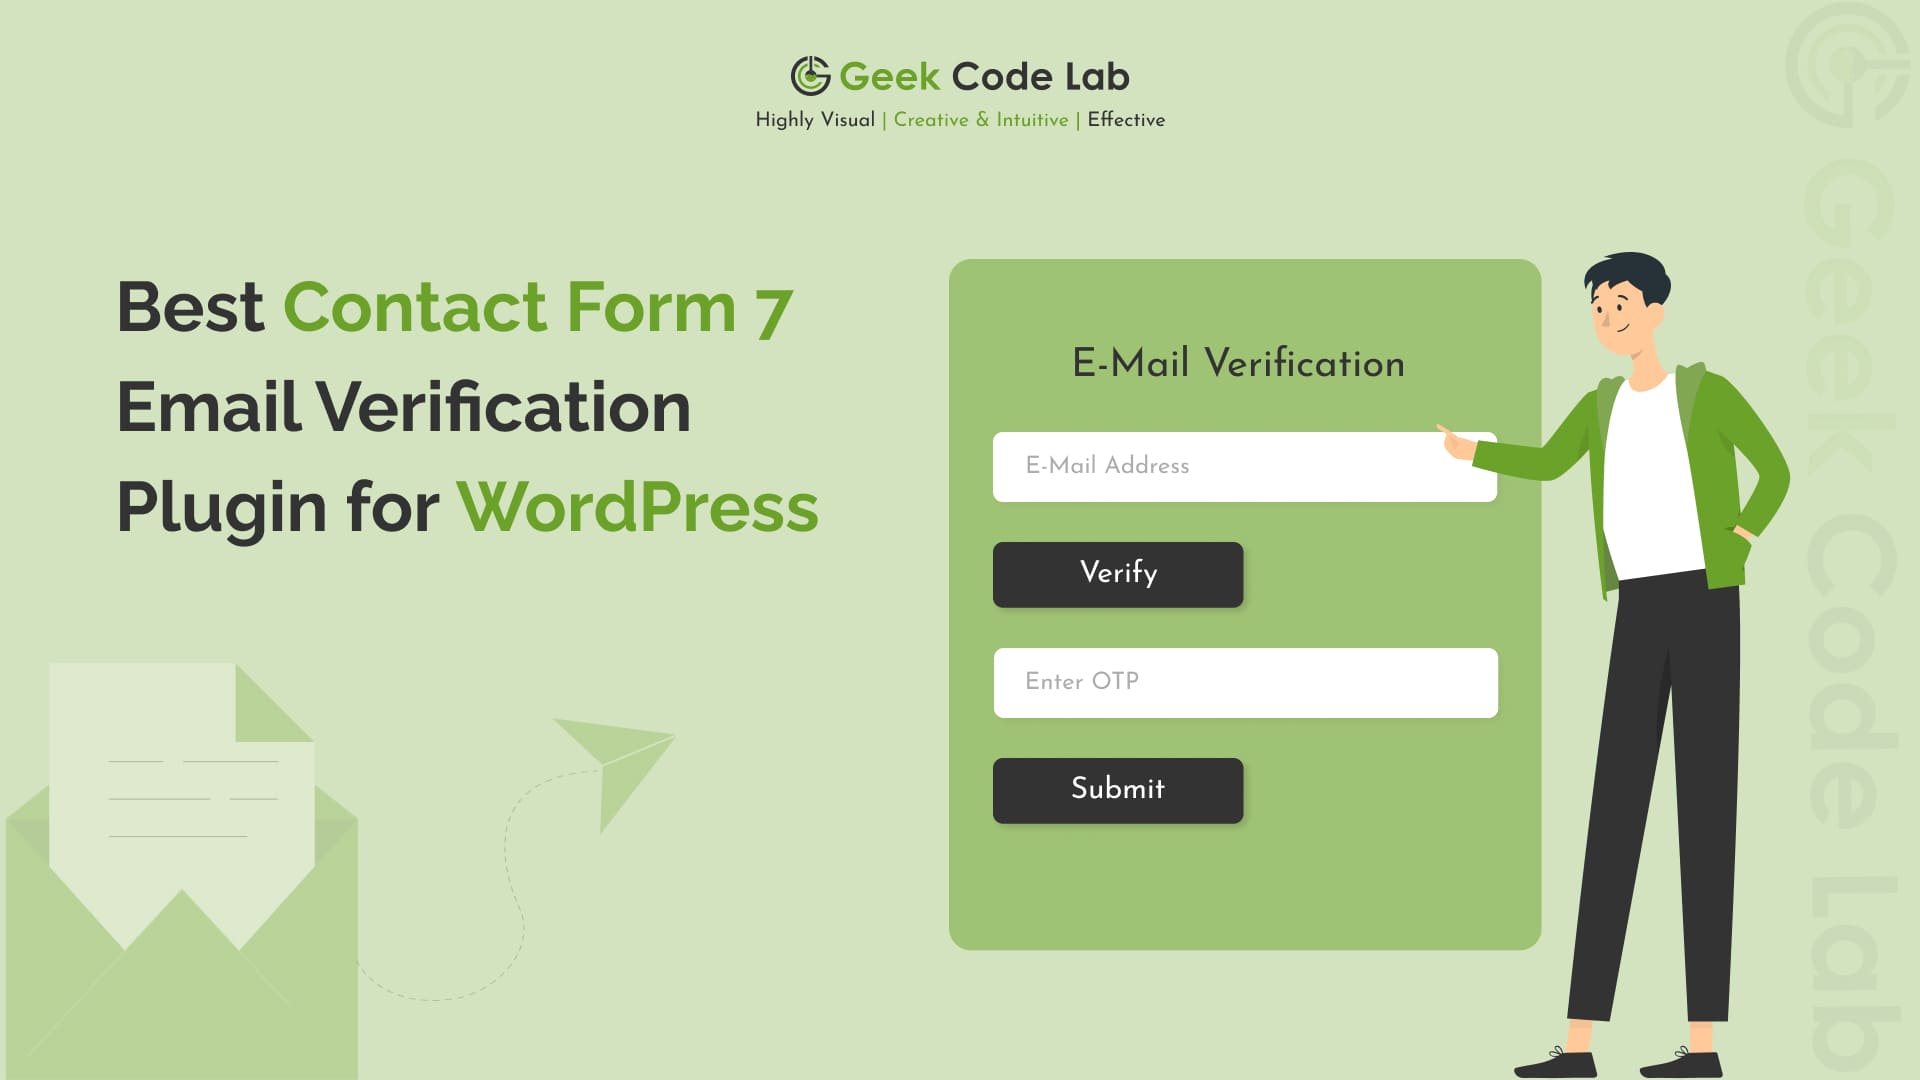 Best Contact Form 7 Email Verification Plugin for WordPress